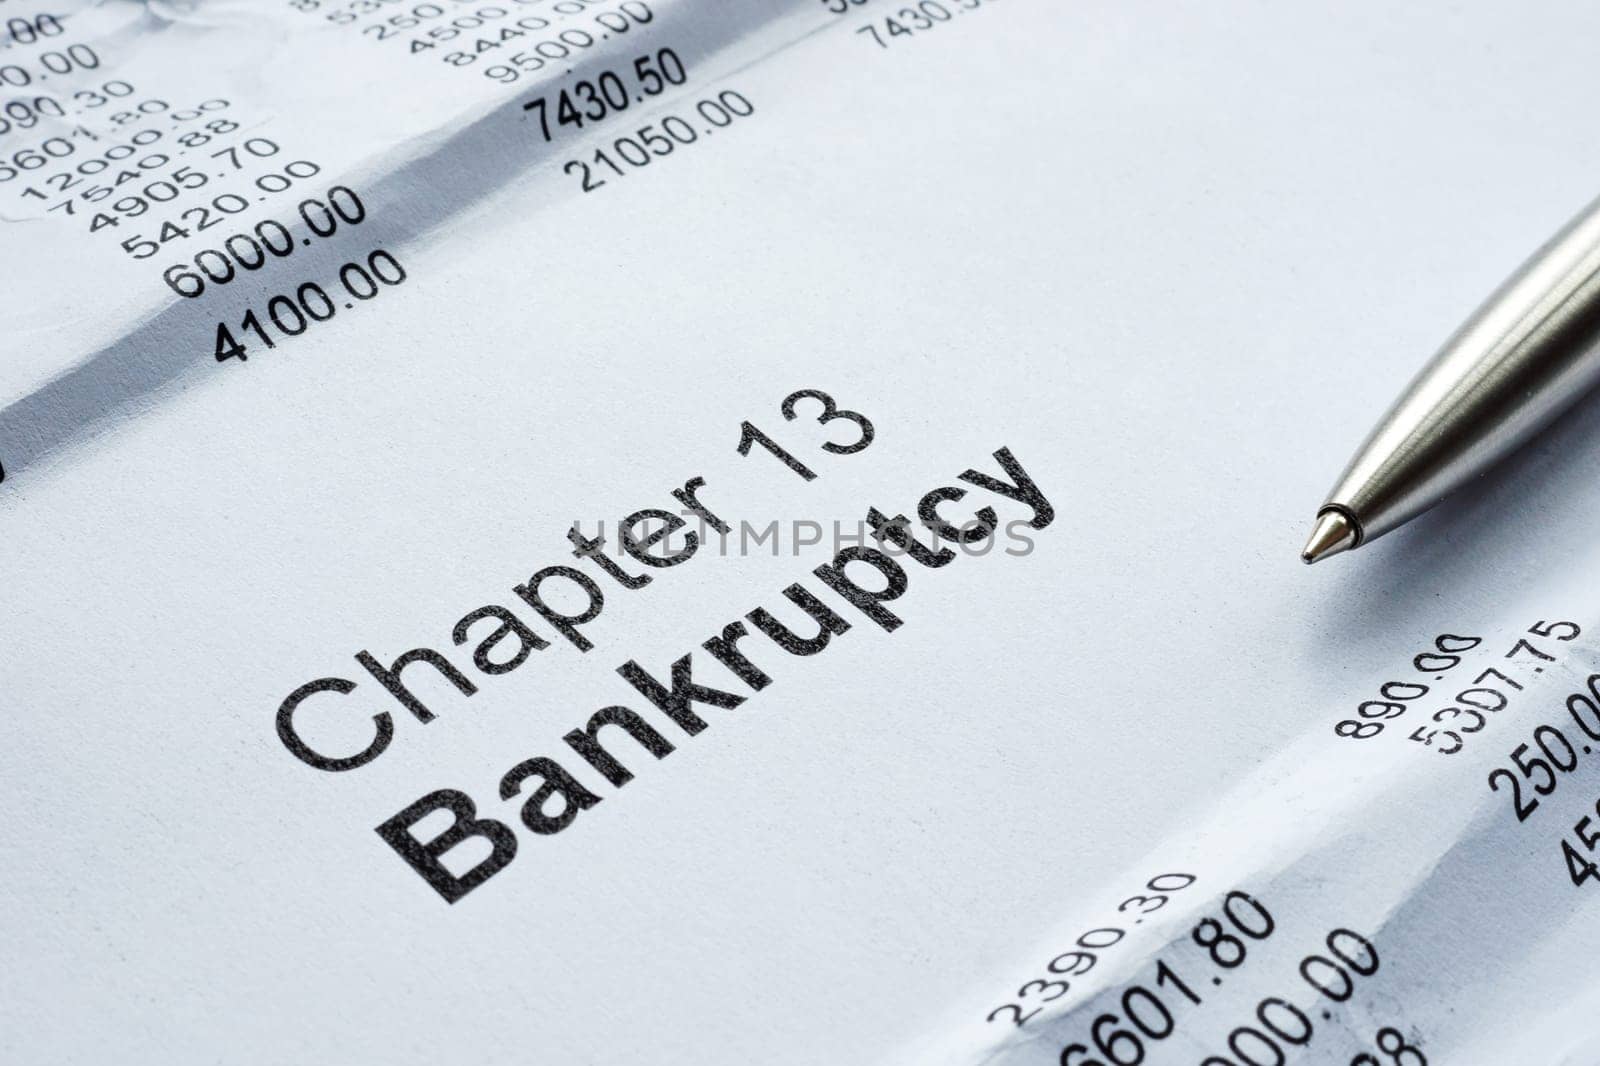 Chapter 13 bankruptcy financial report sheet. by designer491